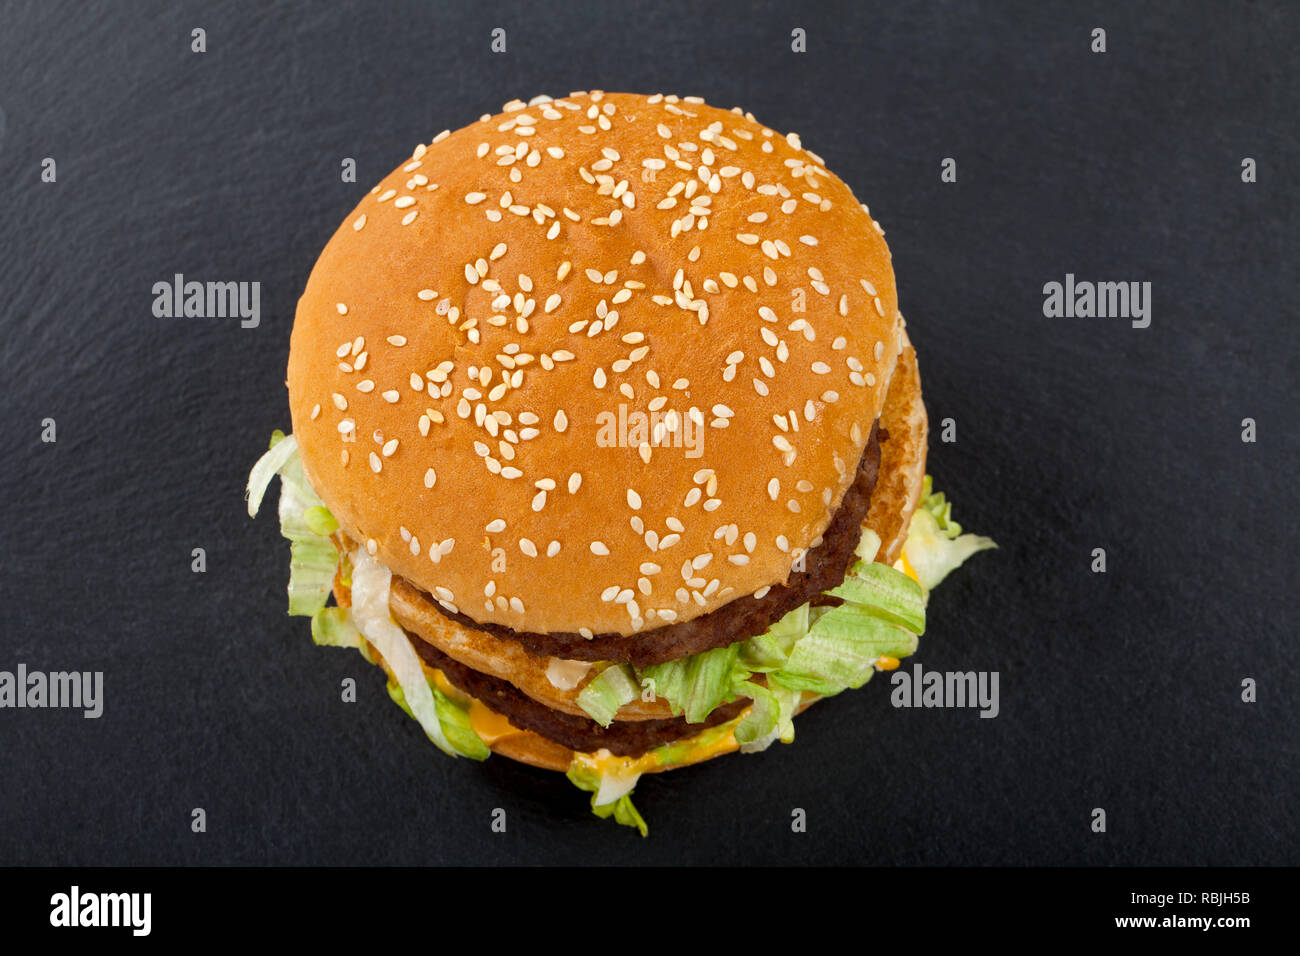 Picture of a delicious fresh double cheeseburger with sesame bun. Top view. Black background Stock Photo